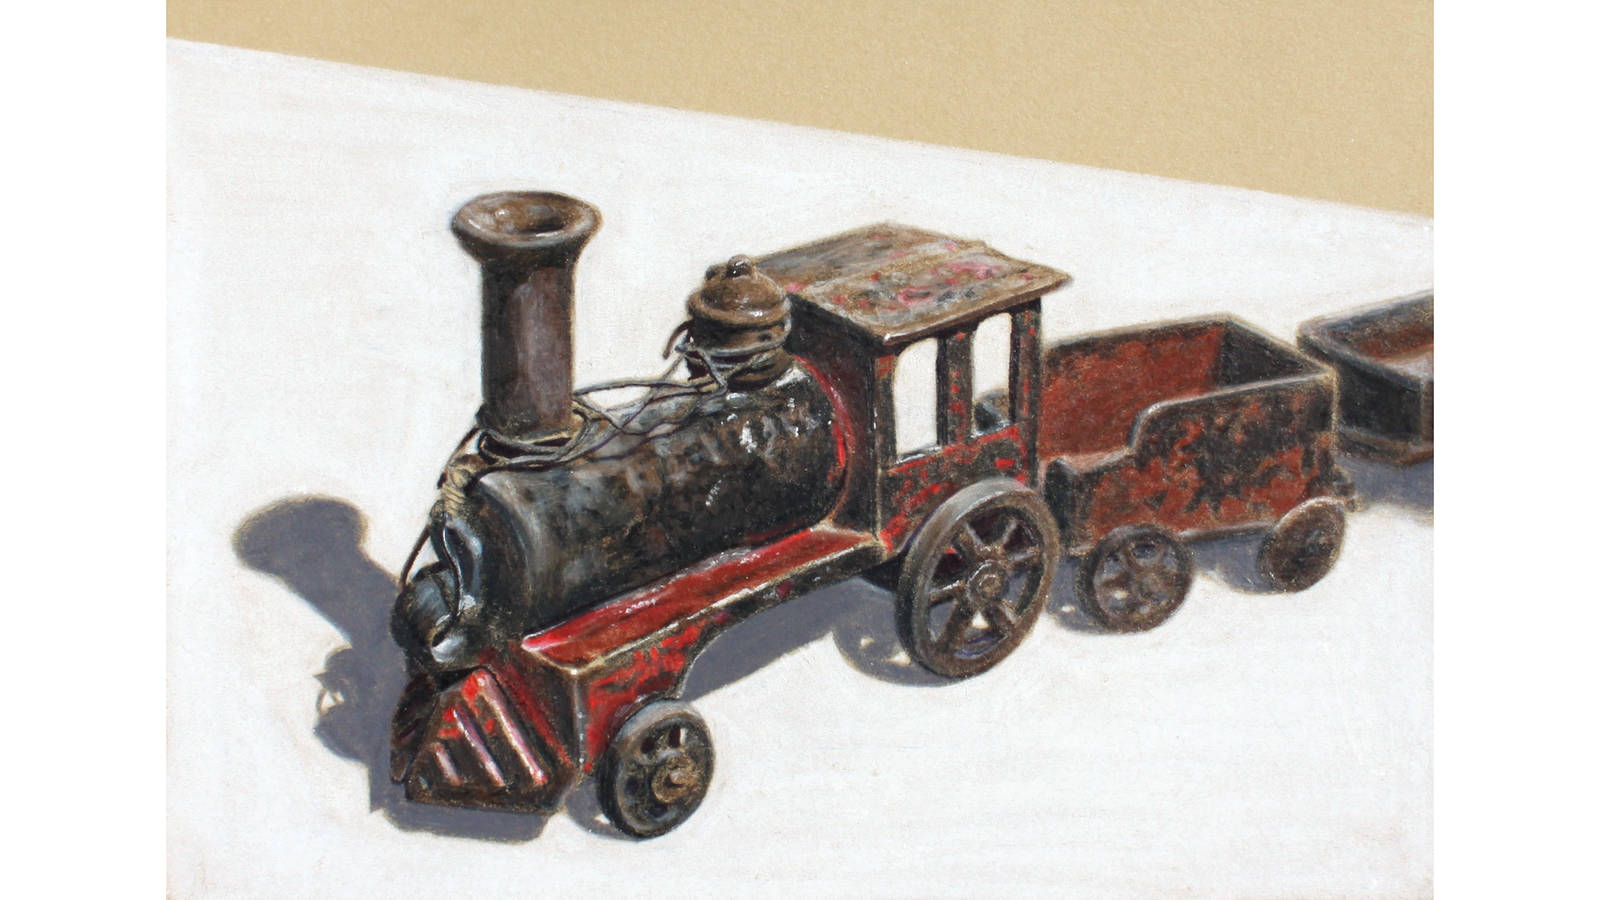 <h3 style="text-align: center; padding: 50px;"><span class="text-Intro-style">A colored pencil drawing of Herbert Hoover’s boyhood train, completed in 2018. The train is part of the collection at the Herbert Hoover Presidential Library and Museum, which Heckel had access to during her residency at the Herbert Hoover National Historic Site in Iowa.</span></h3>